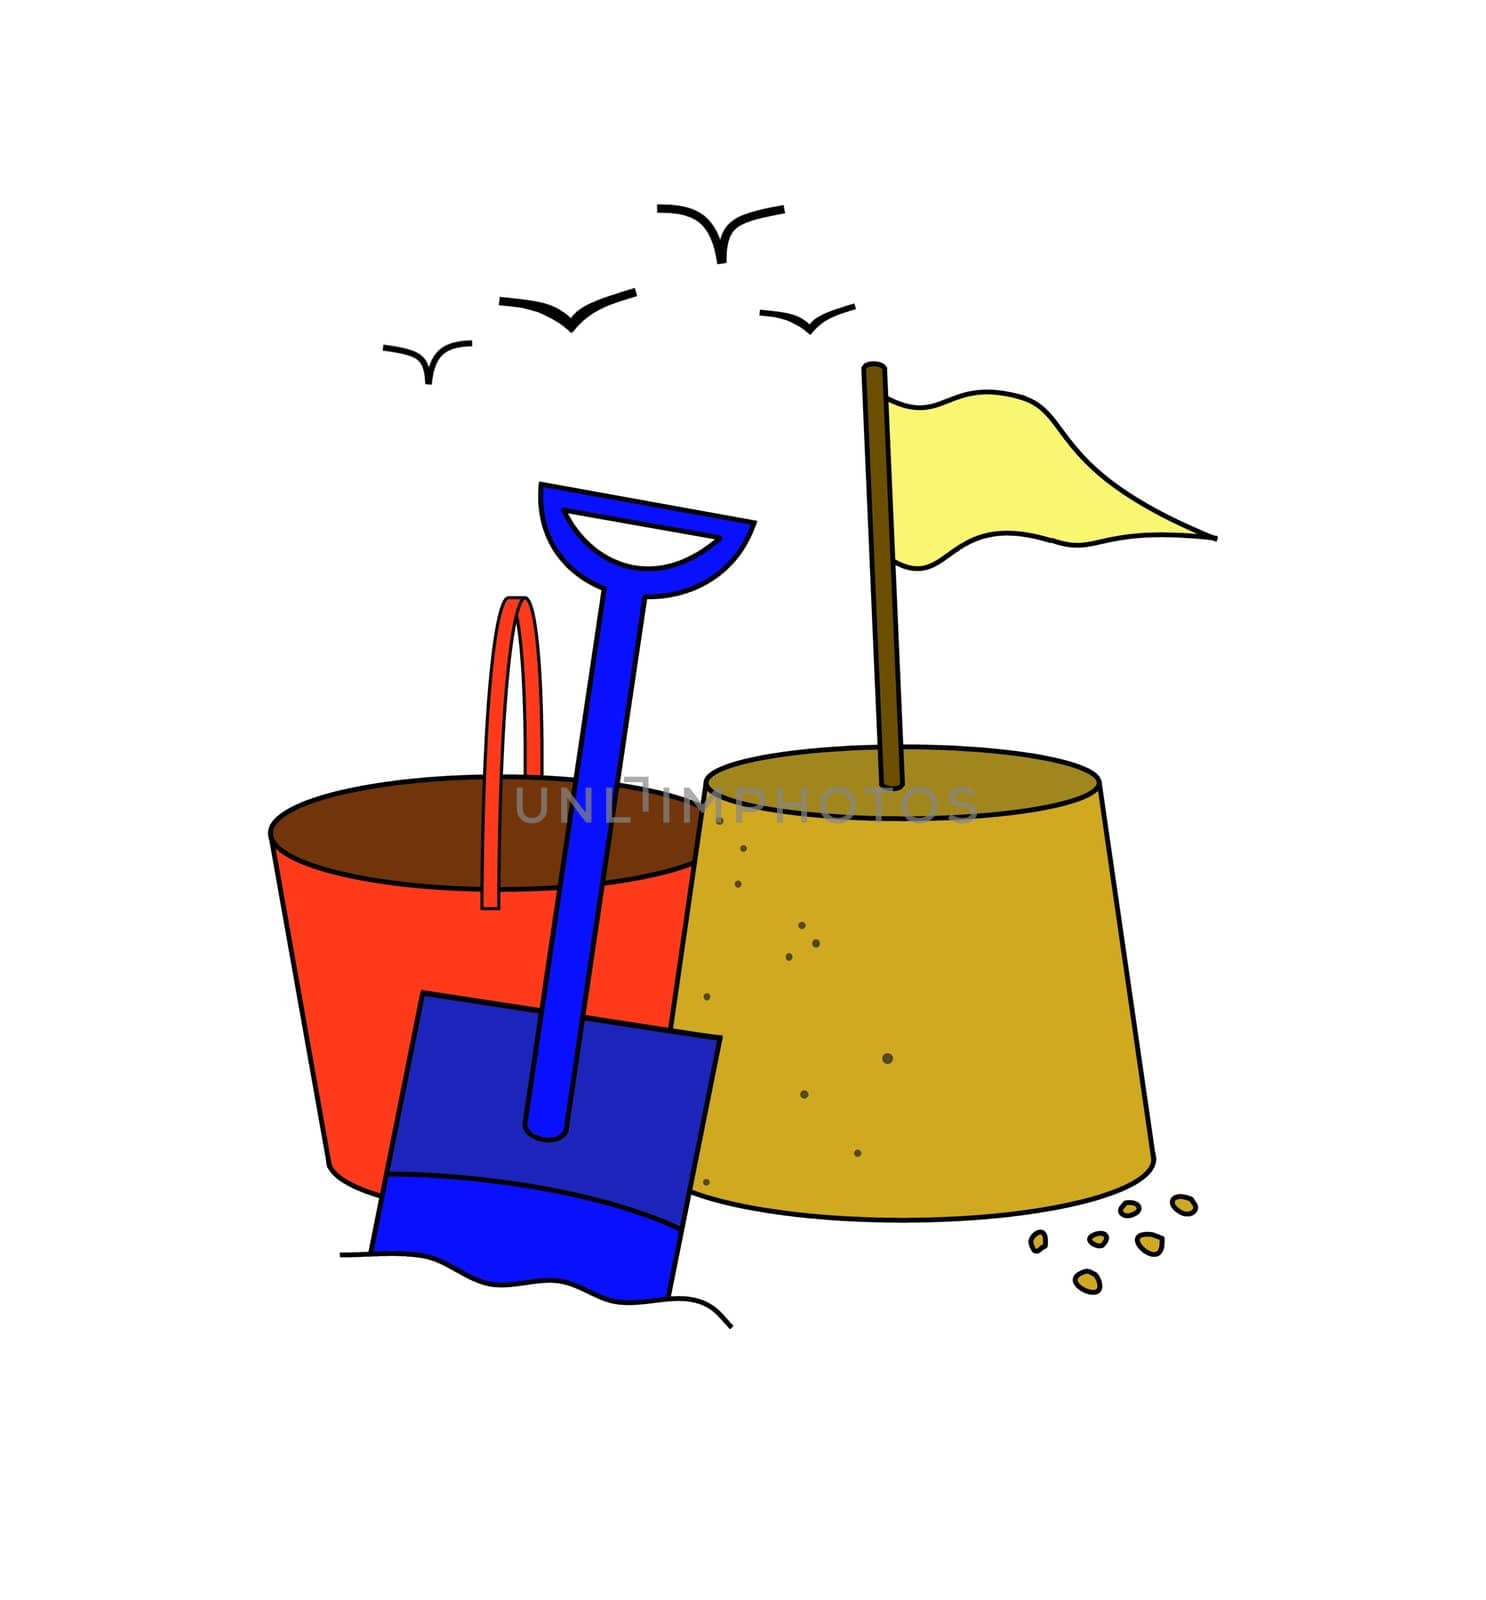 Illustration of a sandcastle bucket spade and seagulls
